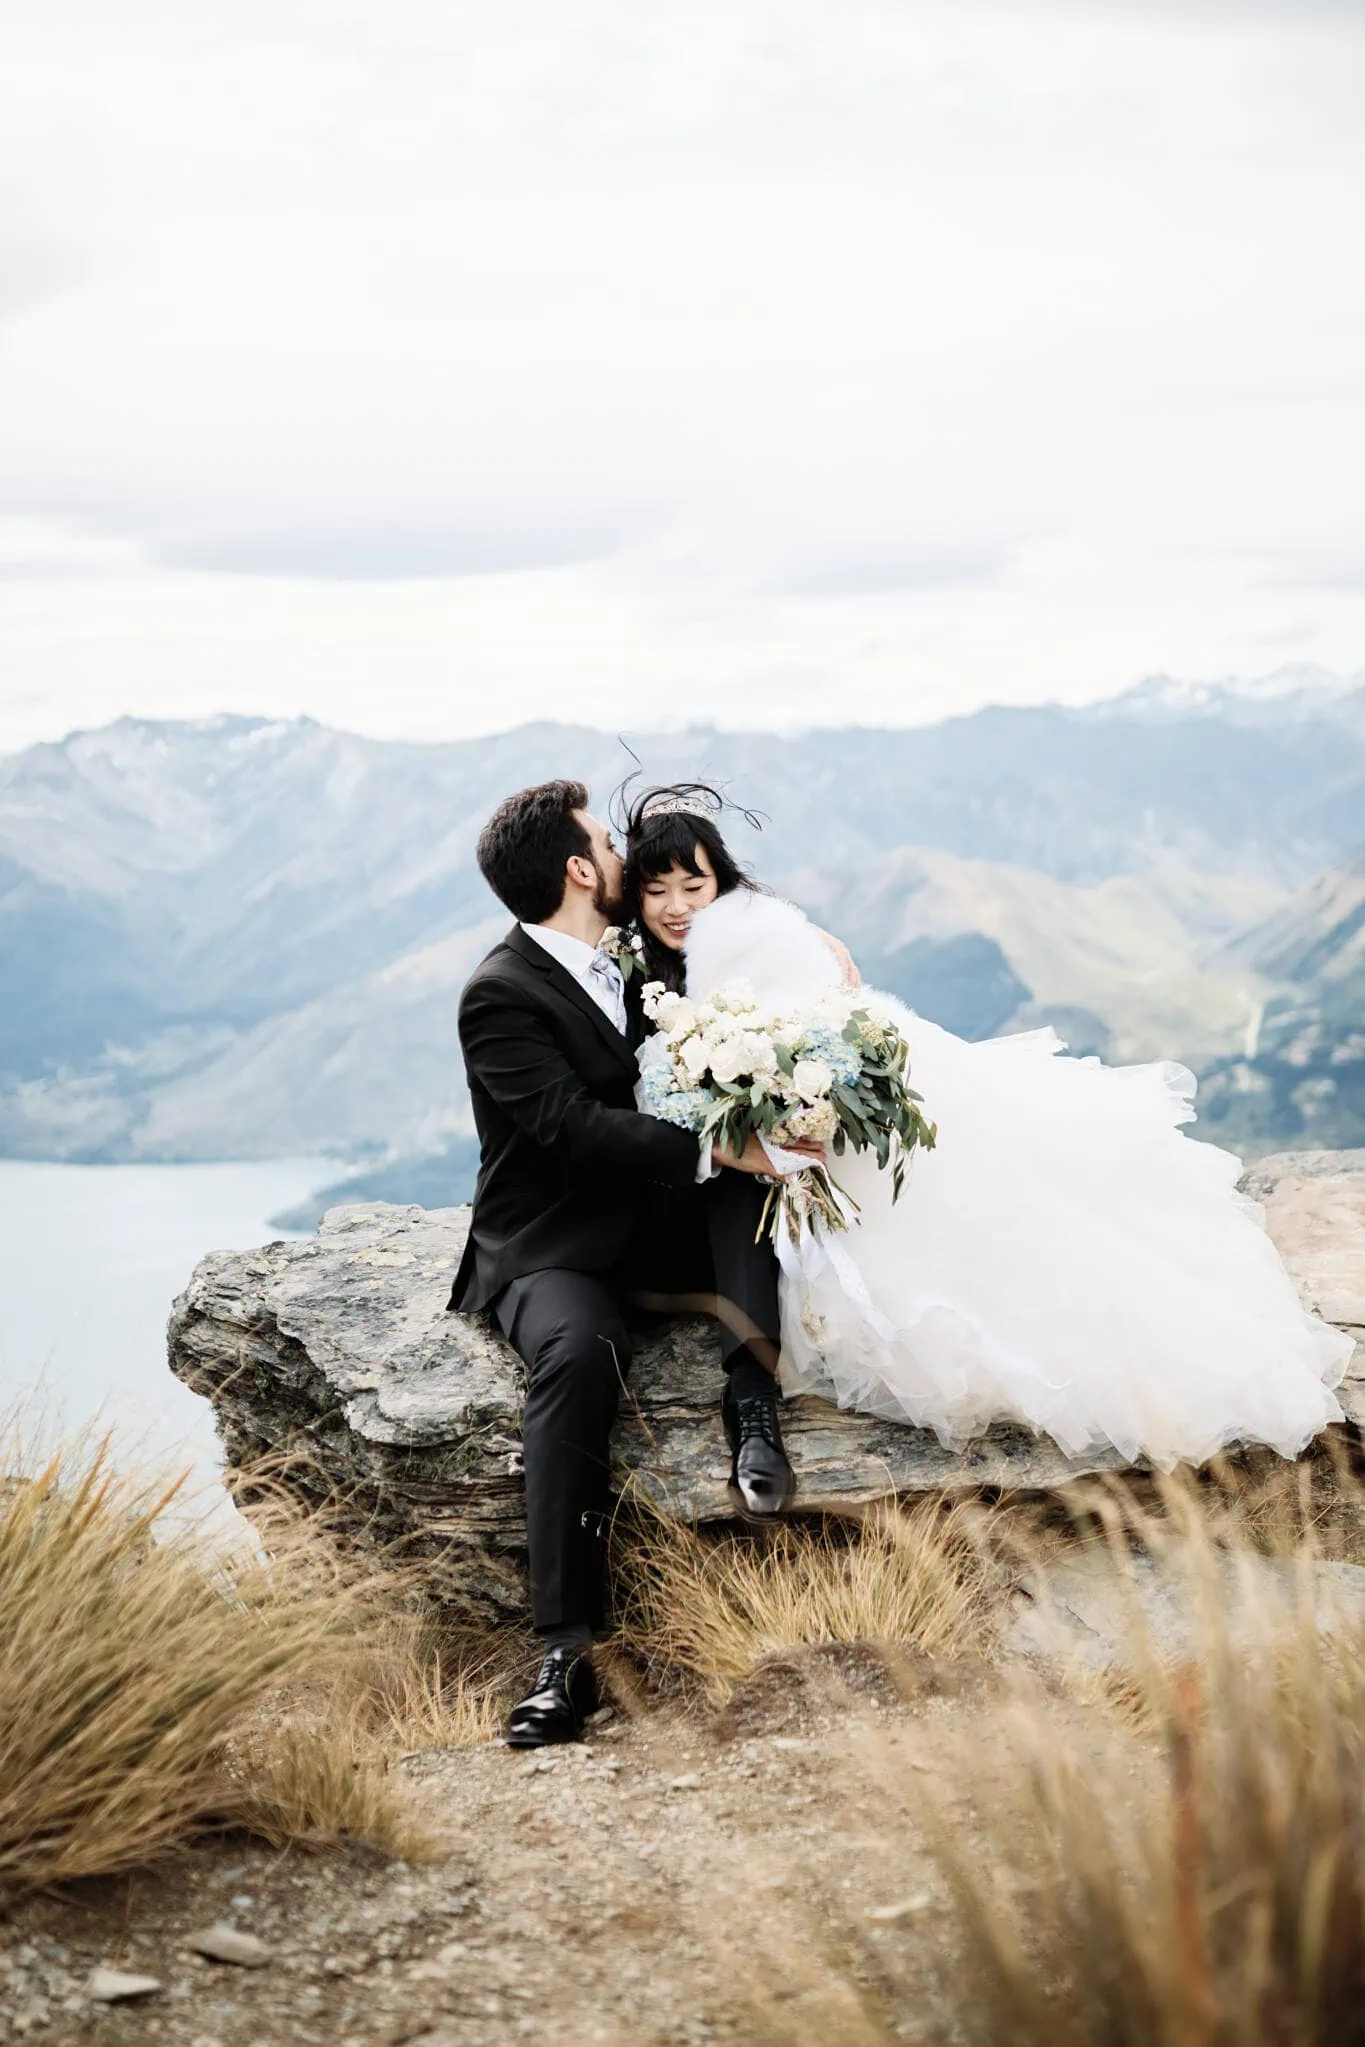 Carlos and Wanzhu - Intimate mountaintop wedding in New Zealand.